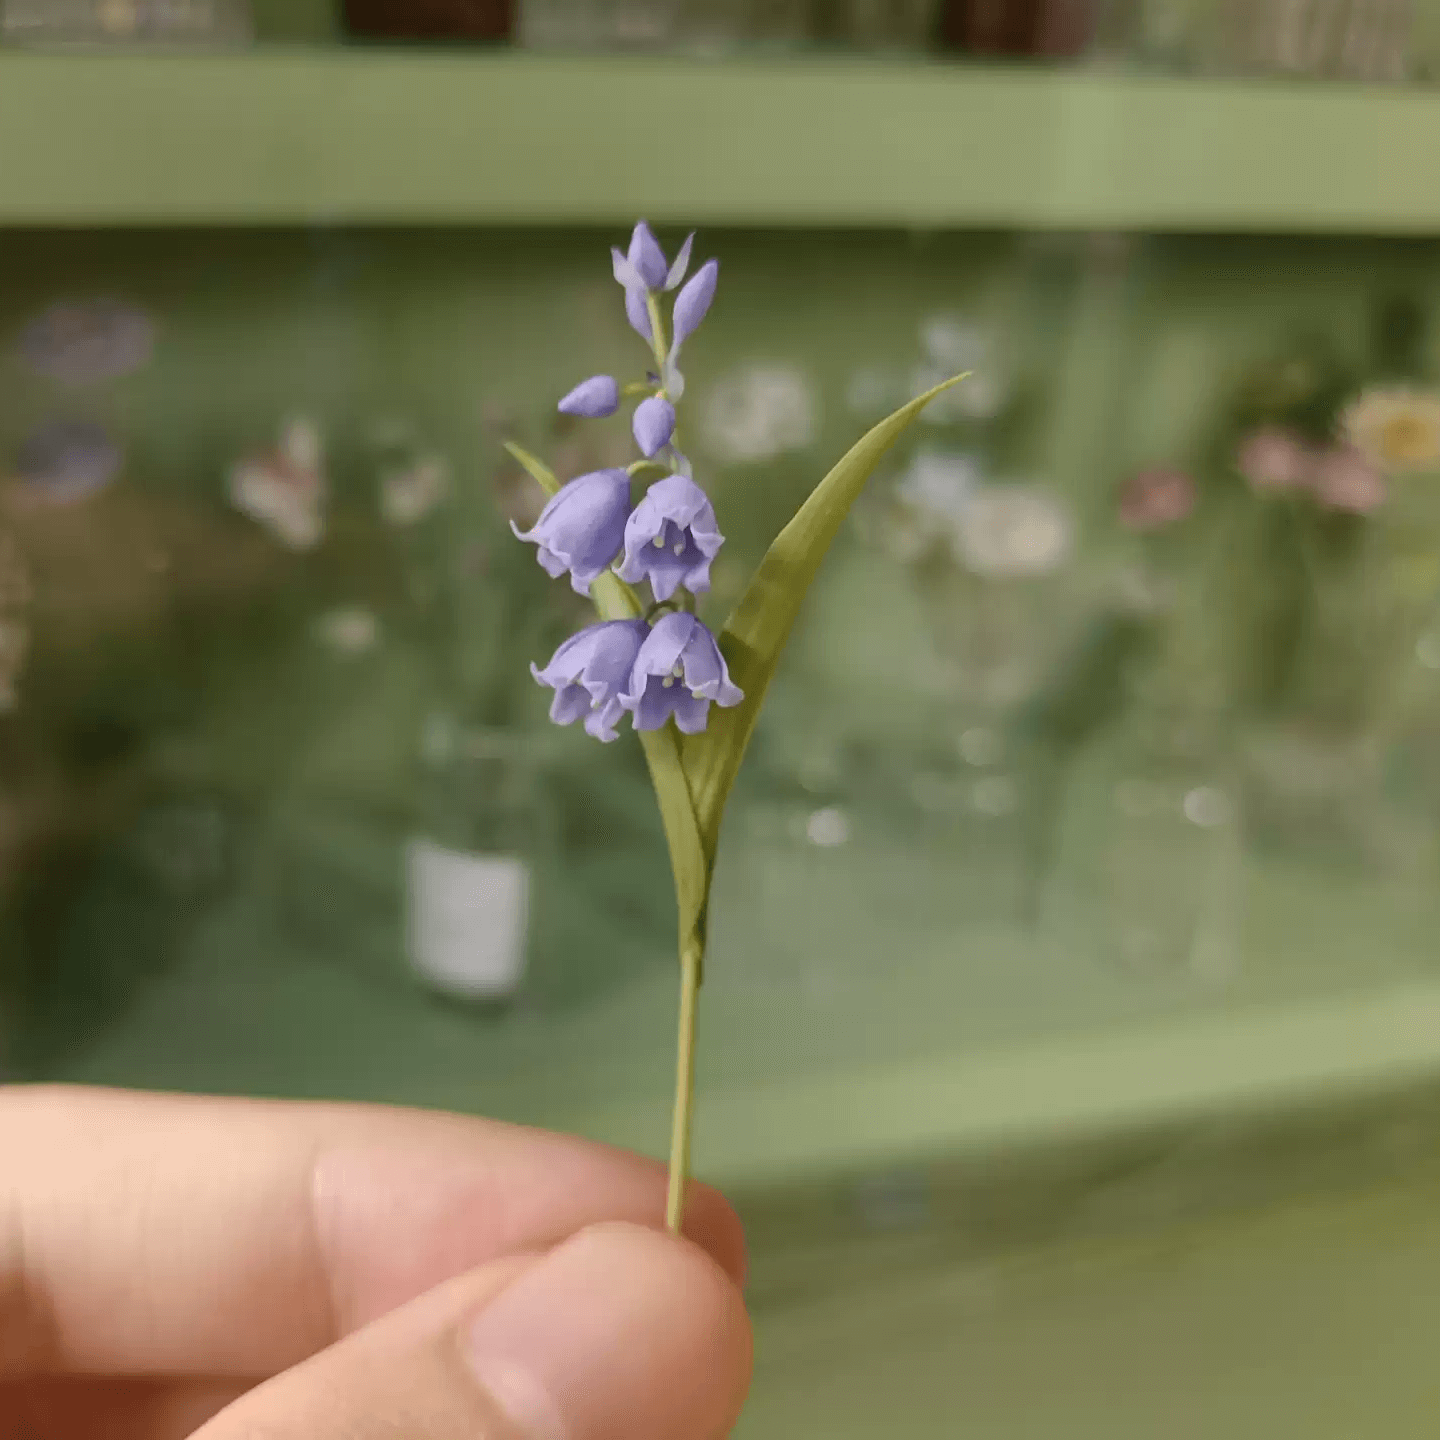 Bluebell (Hyacinthoides non-scripta) is an ancient-woodland-indicator plant. If you spot it while you're out exploring, it could be a sign you're standing in a rare and special habitat. Miniature for dolls, dollhouses, roomboxes. Suitable for Blythe, Barbie, Paola,and other dolls with a height of 10-15.8 inches.